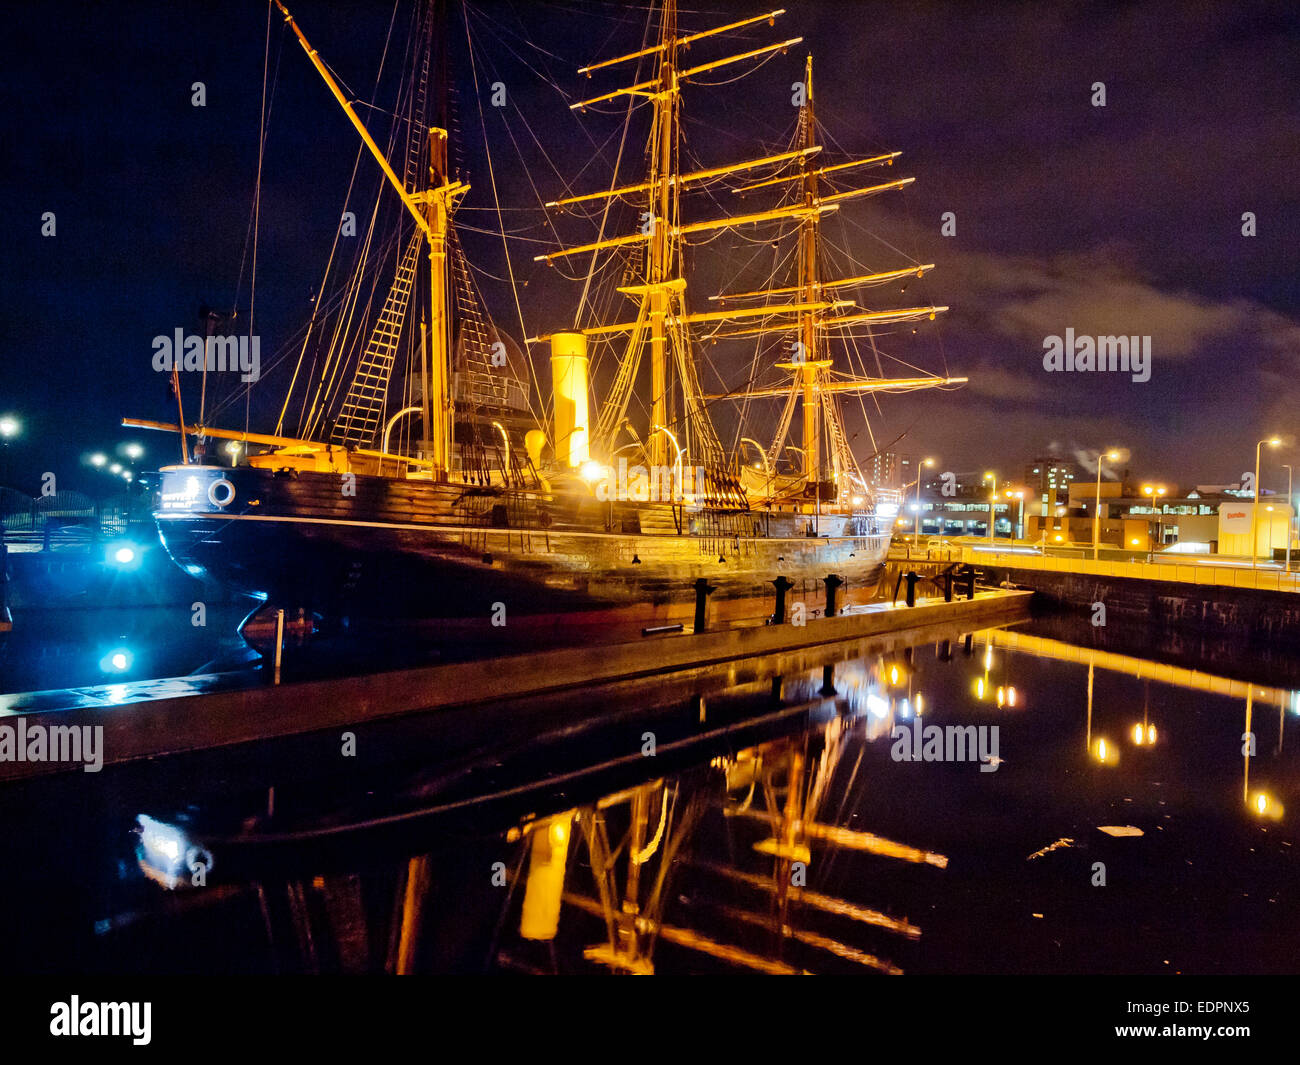 Rrs discovery point tay centro visita museo di notte Foto Stock